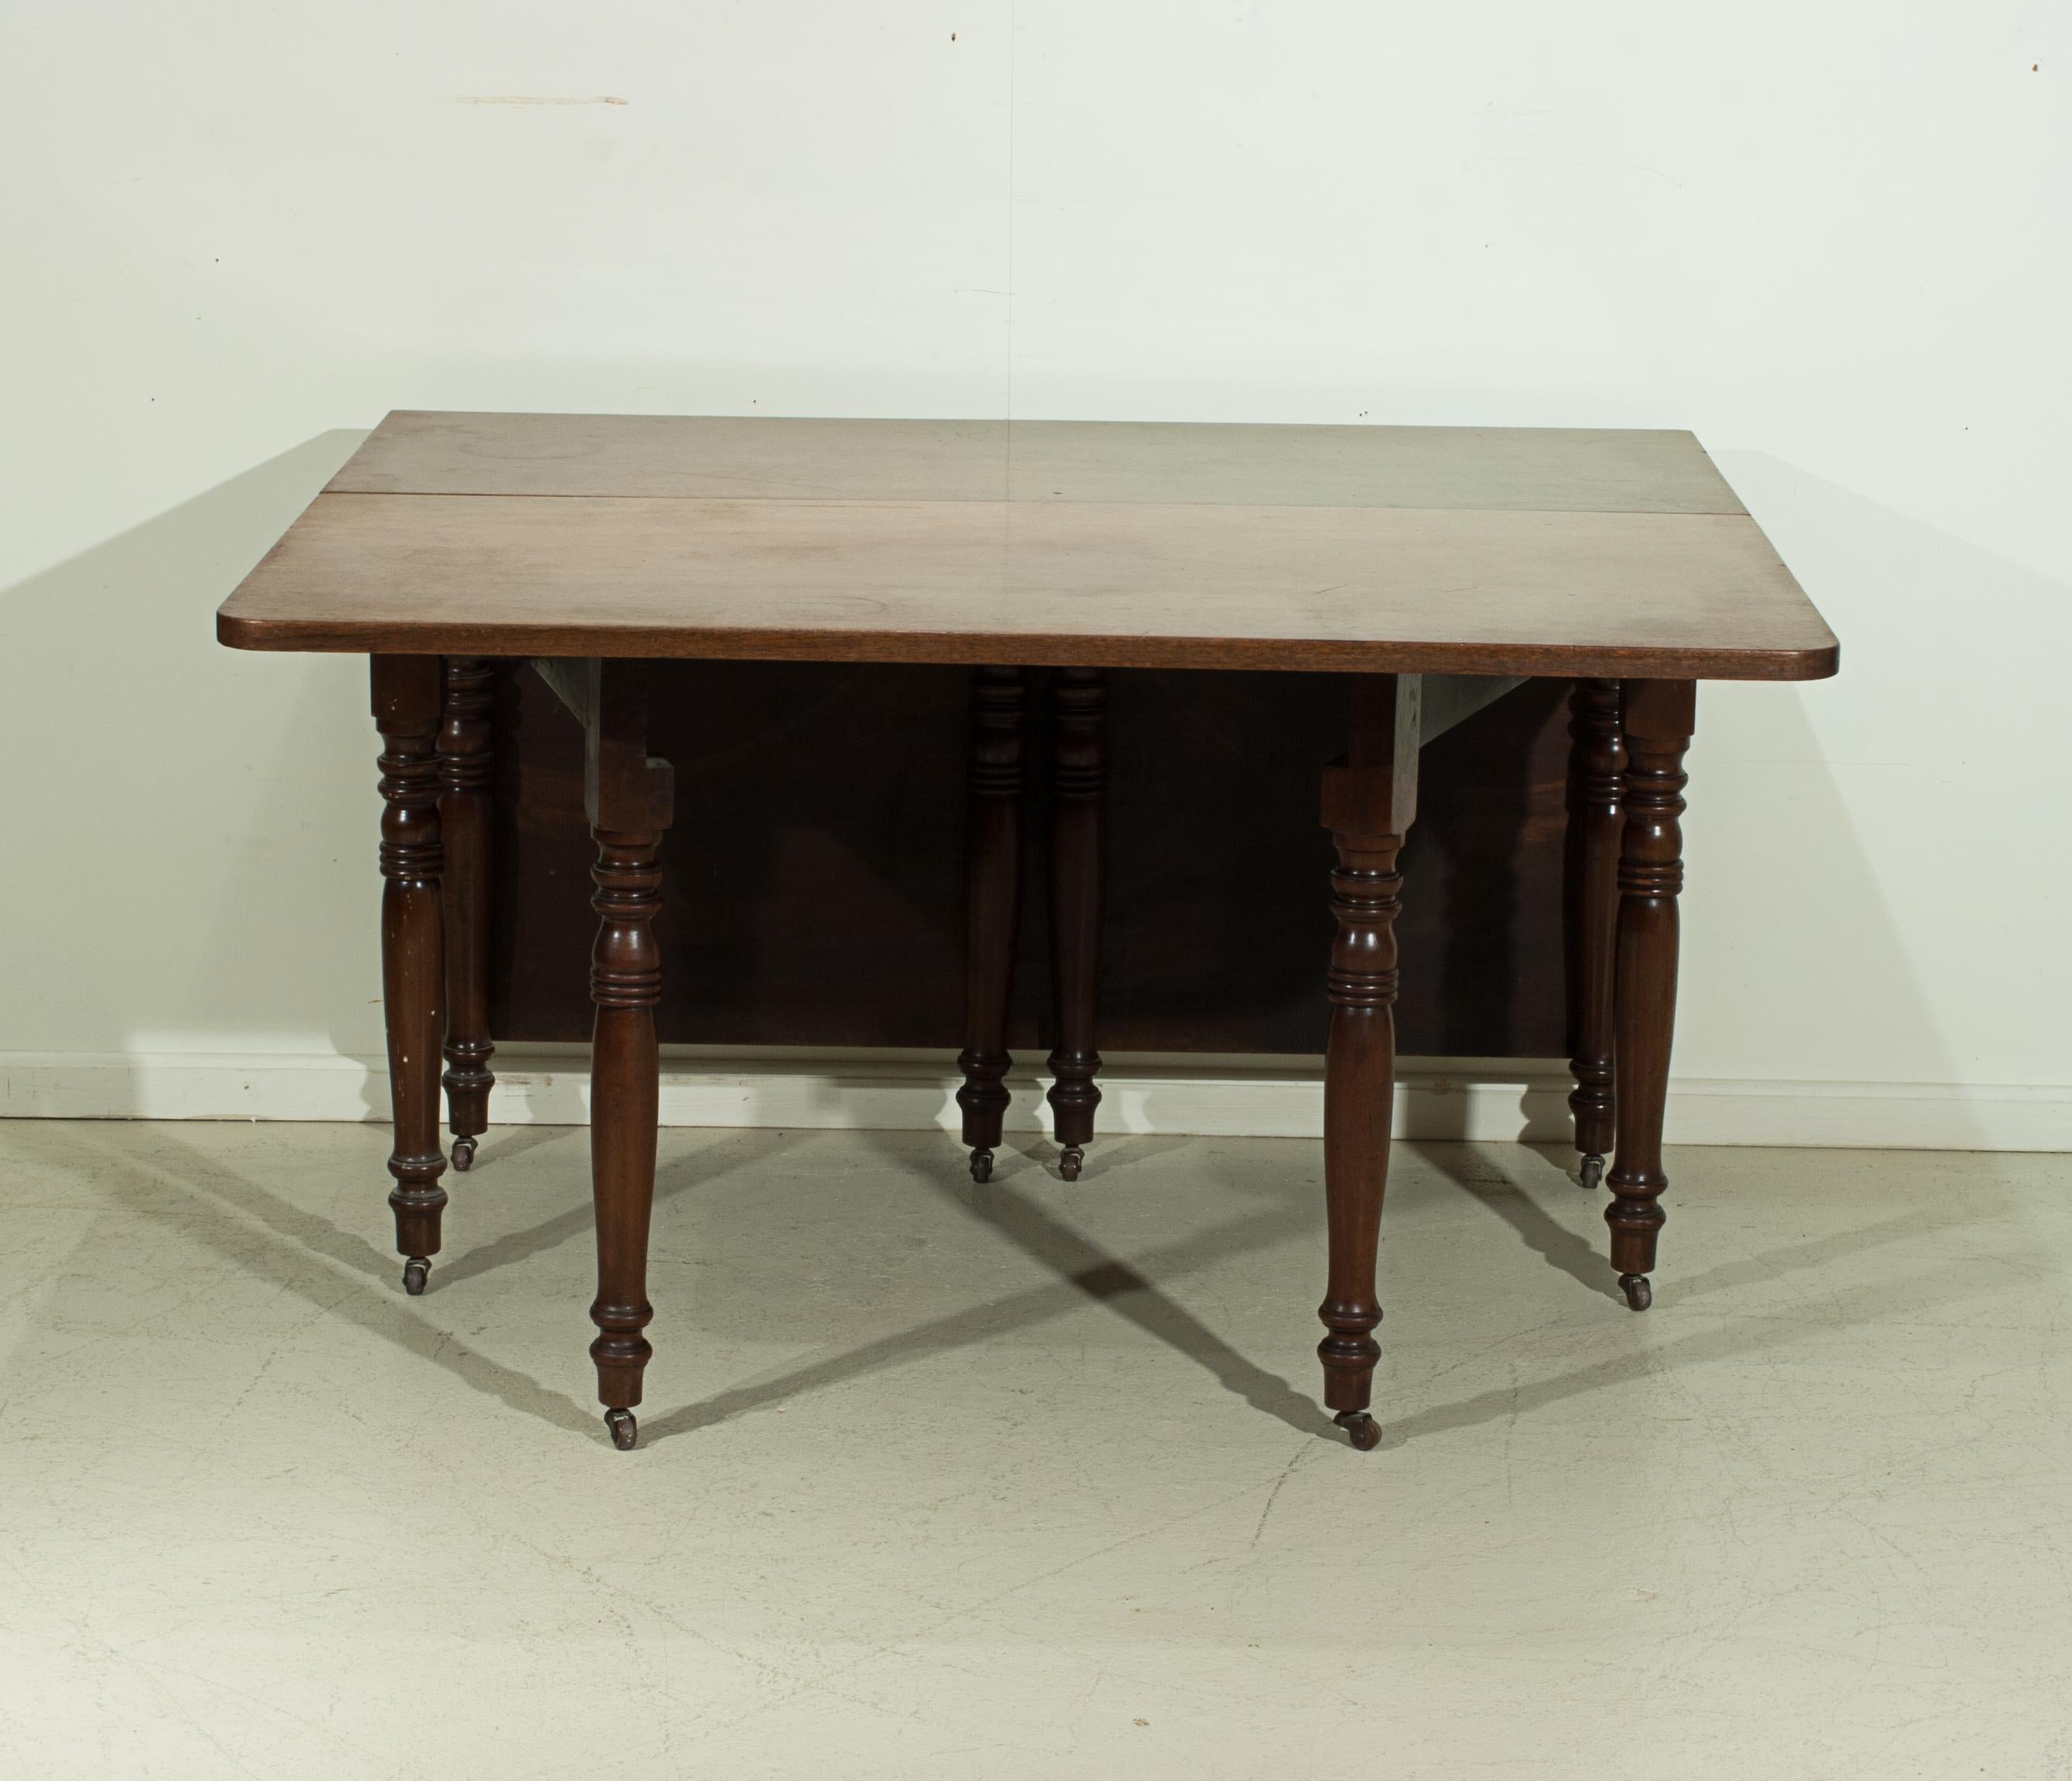 Mahogany Gateleg Dropleaf Dining Table.
A good-sized 19th century rectangular top drop leaf dining table. The solid mahogany top having two drop-leaves, with good colour and patination. Standing on ring turned legs raised on ceramic castors, the